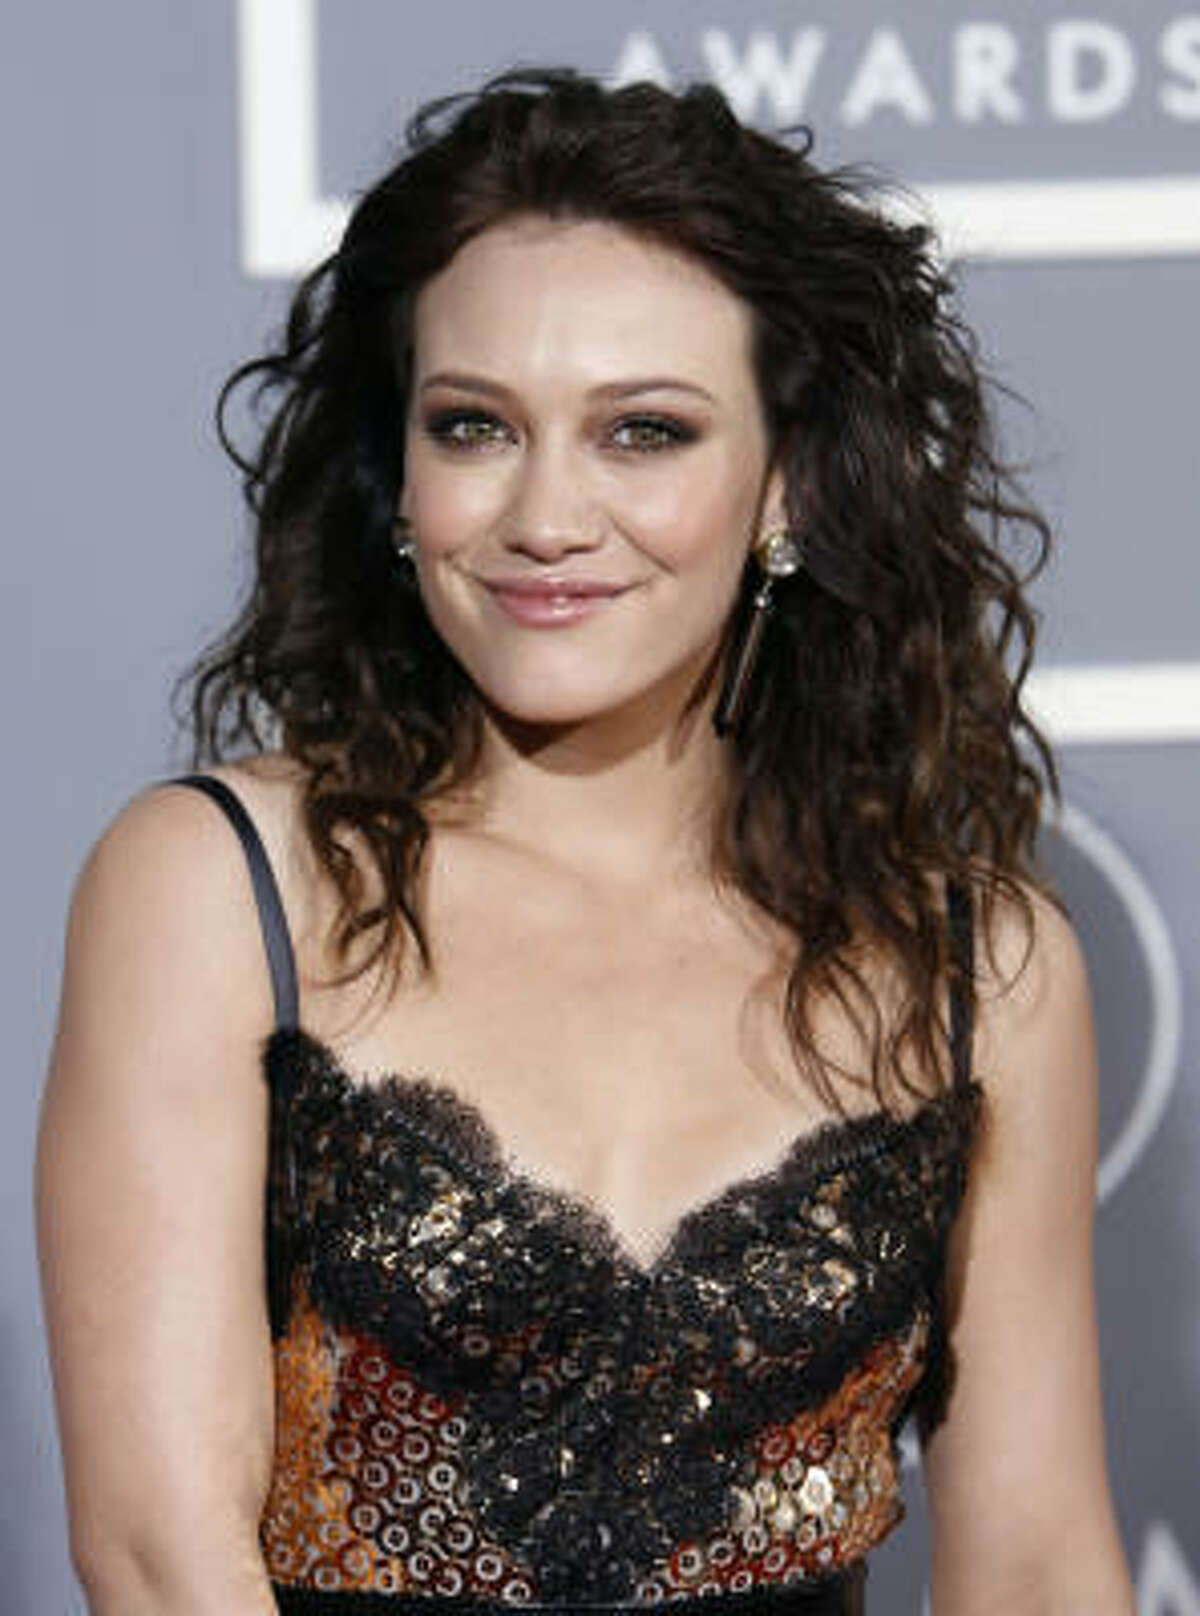 Hilary Duff sported brunette tresses at this year's Grammy awards.